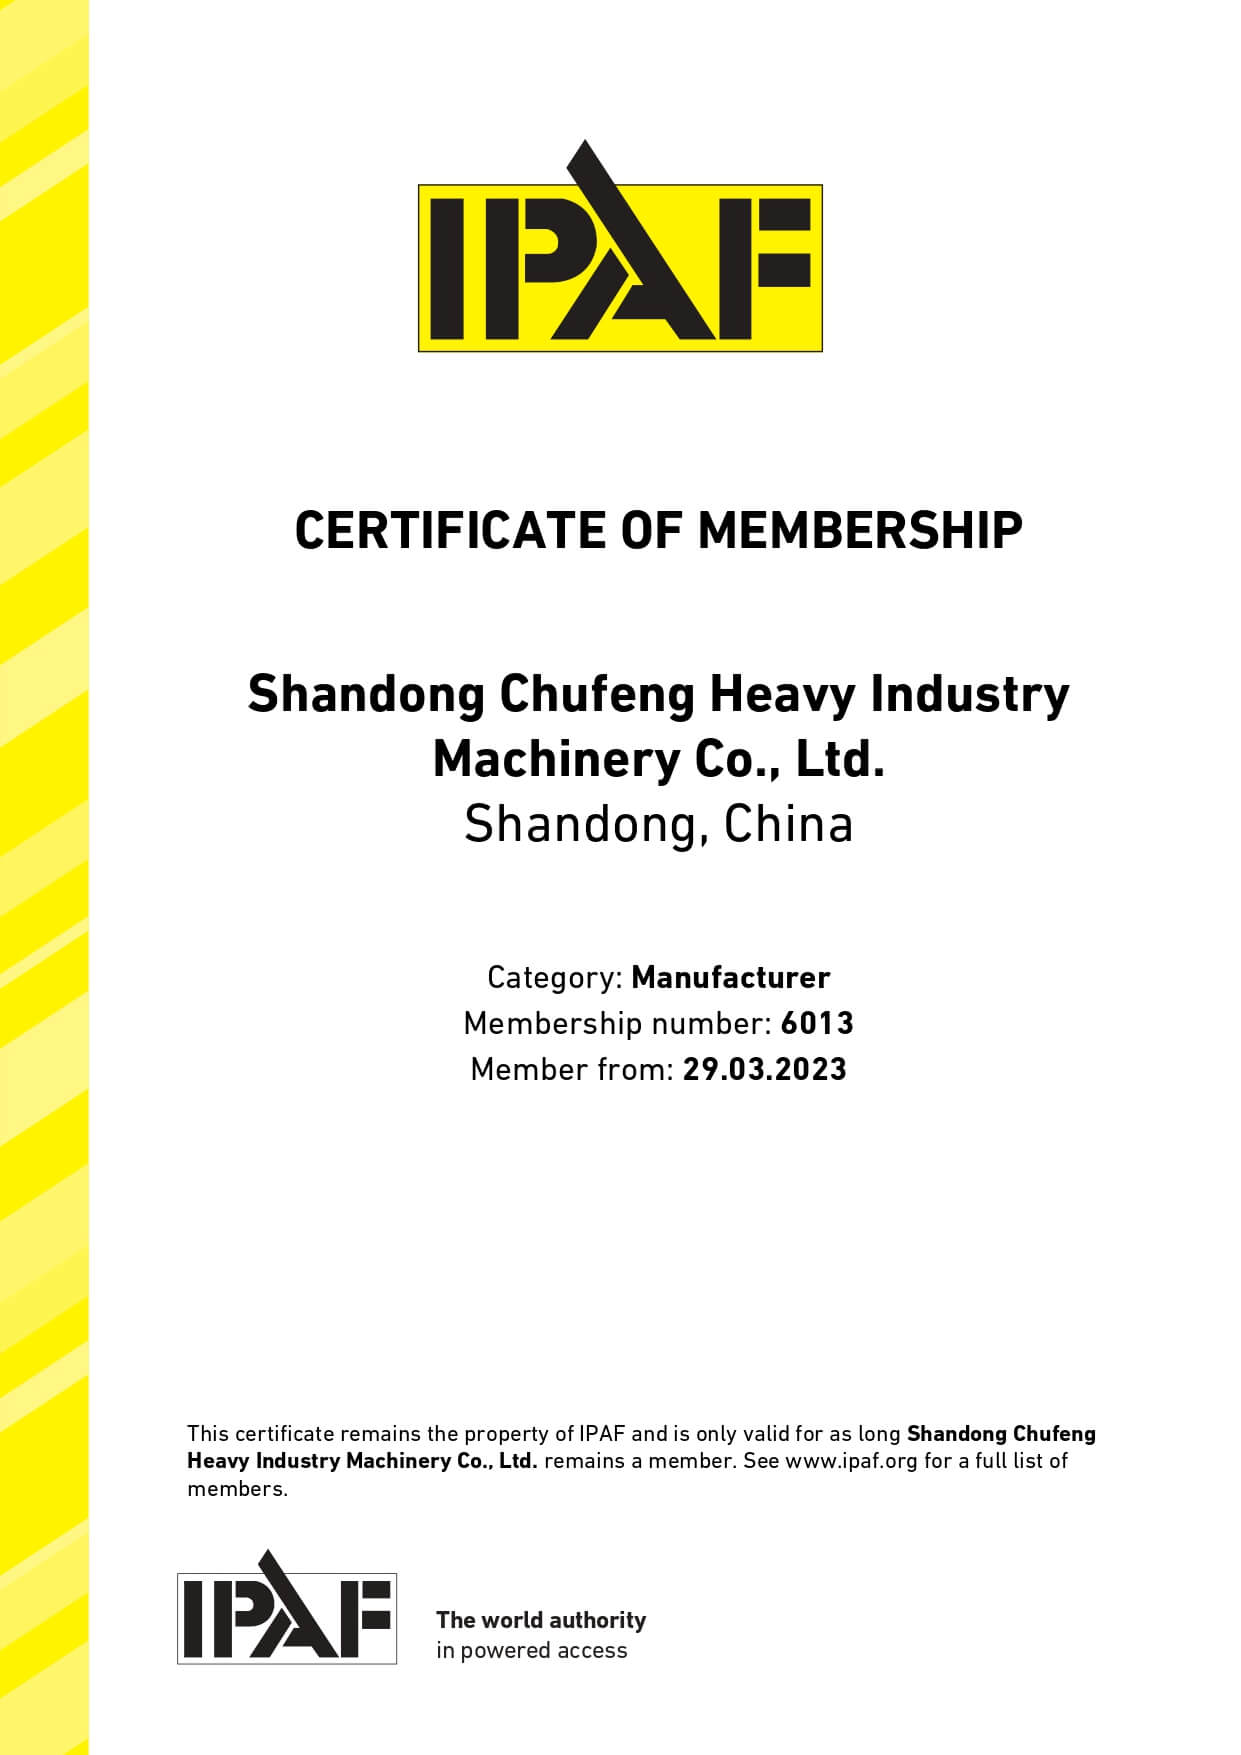 Shandong Chufeng Heavy Industry Machinery Certificate_page-0001